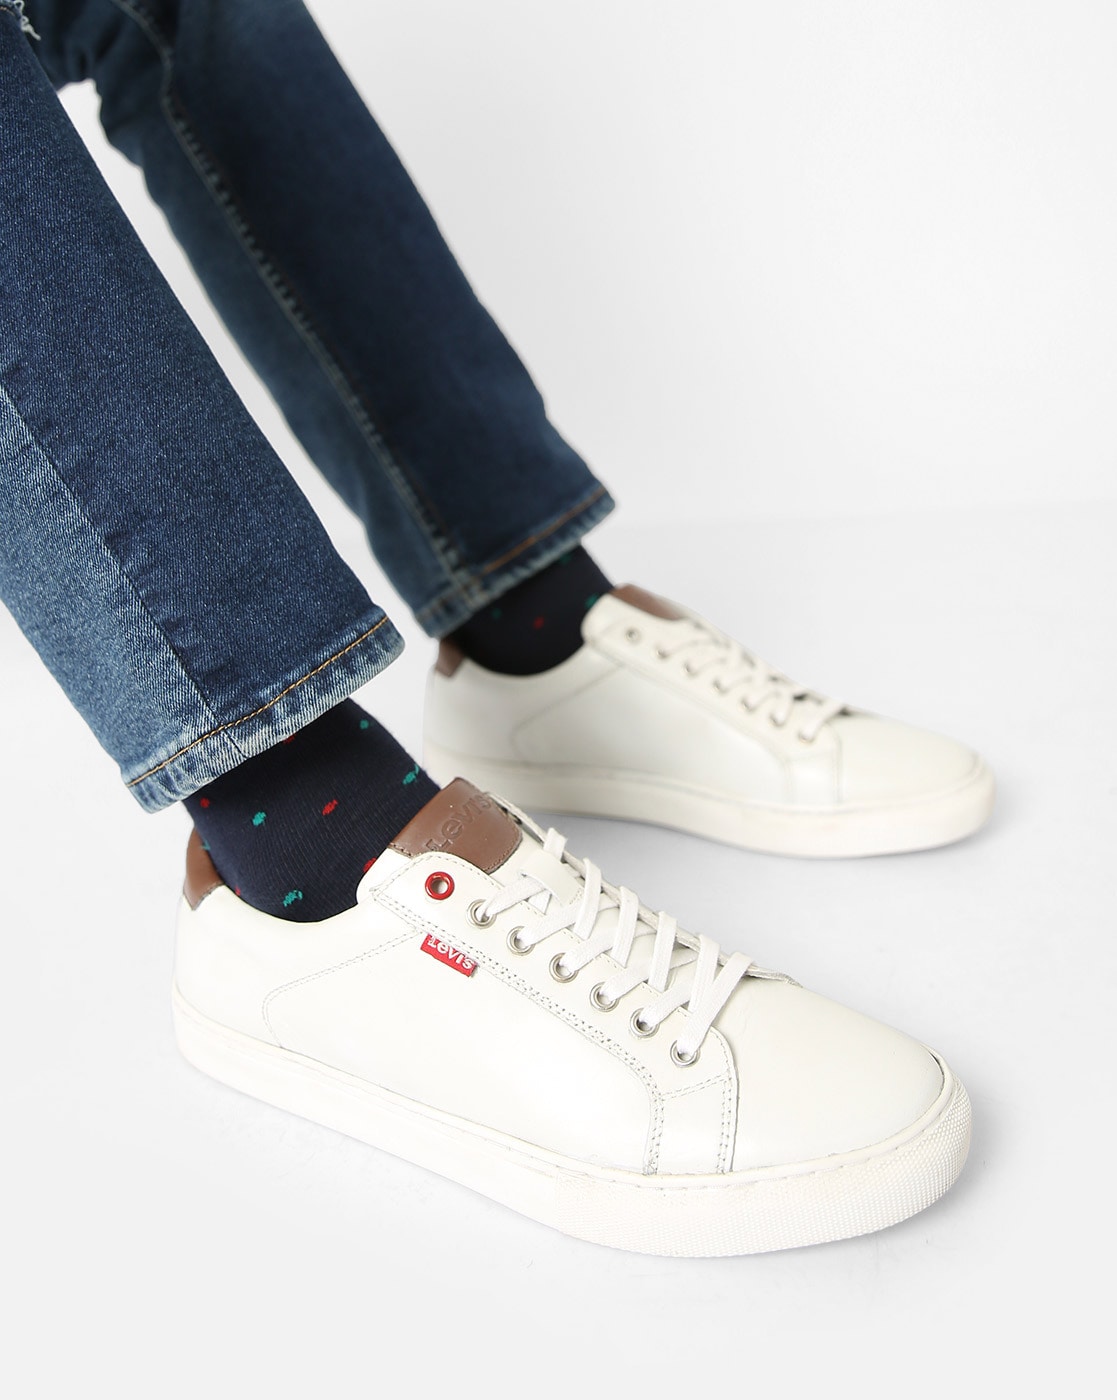 White Jeans + Gucci Ace Sneakers Outfit - Fashion Jackson